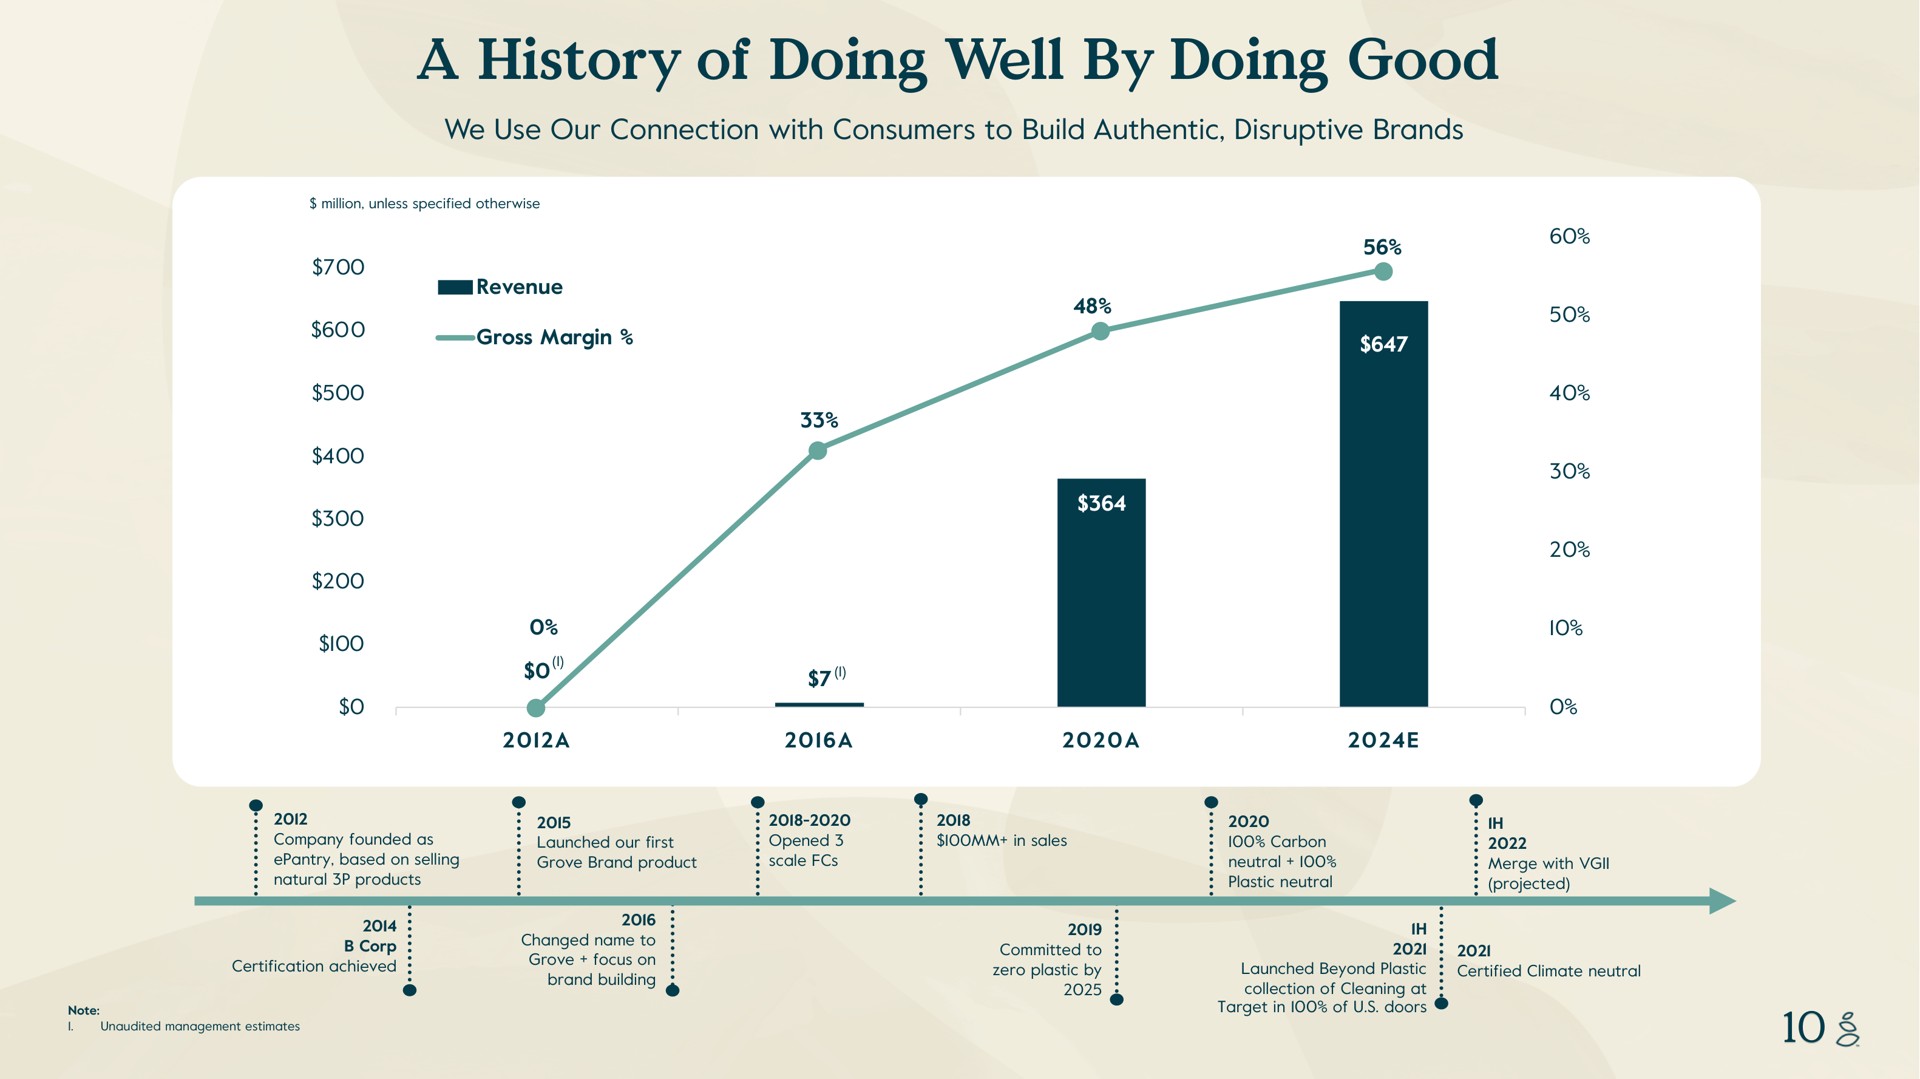 a history of doing well by doing good we use our connection with consumers to build authentic disruptive brands million unless specified otherwise revenue gross margin company founded as based on selling natural products a i a a launched our first grove brand product opened scale in sales carbon neutral plastic neutral corp certification achieved note if unaudited management estimates plies brand building coe bole i committed to zero plastic launched beyond plastic collection cleaning at target in doors merge with projected certified climate neutral | Grove